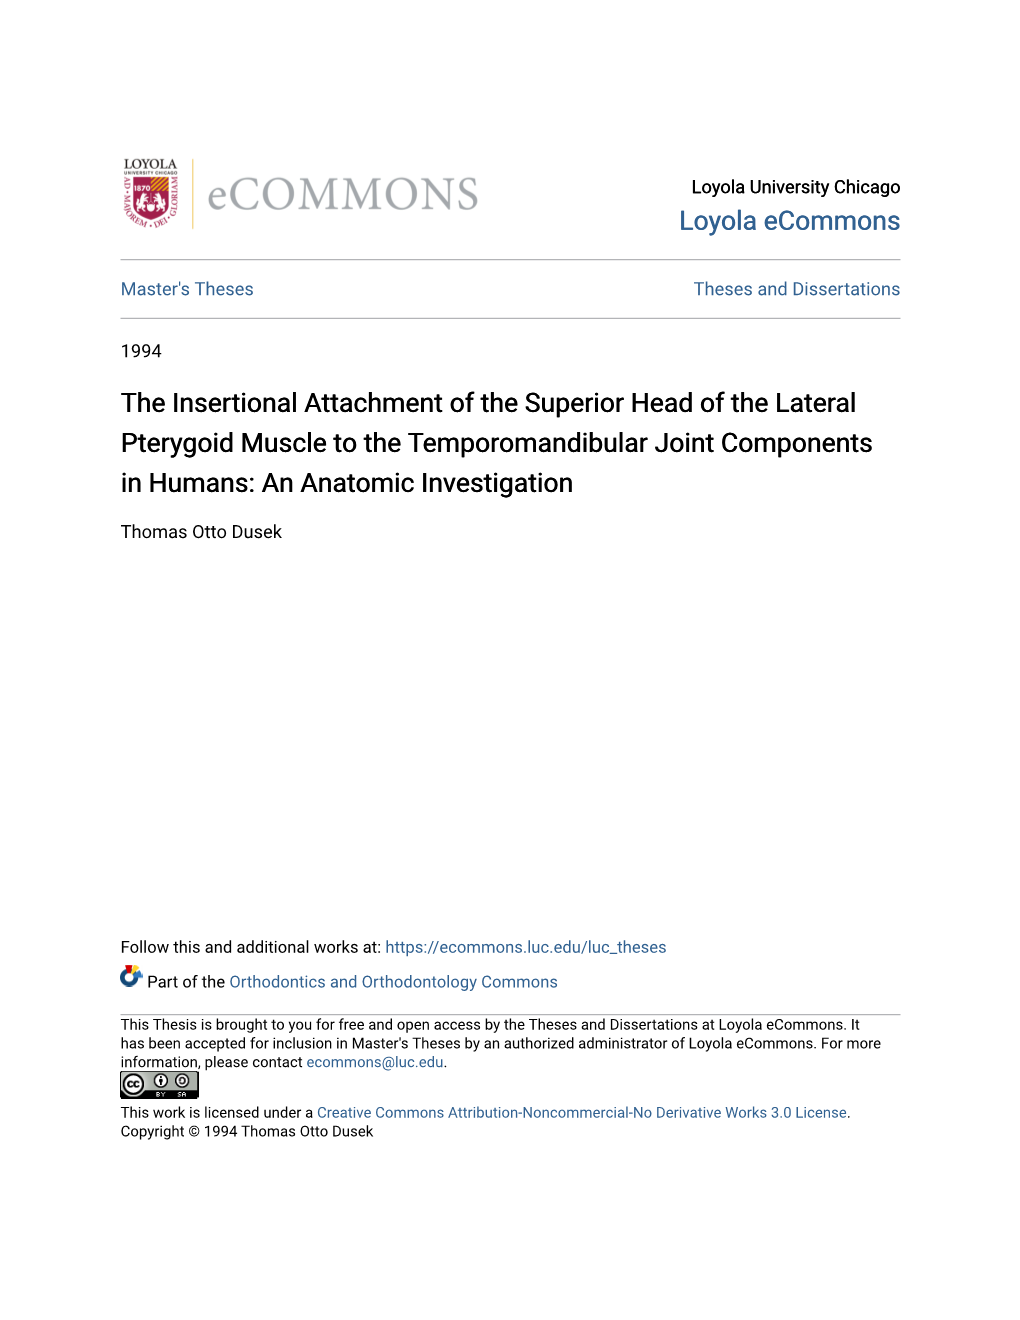 The Insertional Attachment of the Superior Head of the Lateral Pterygoid Muscle to the Temporomandibular Joint Components in Humans: an Anatomic Investigation